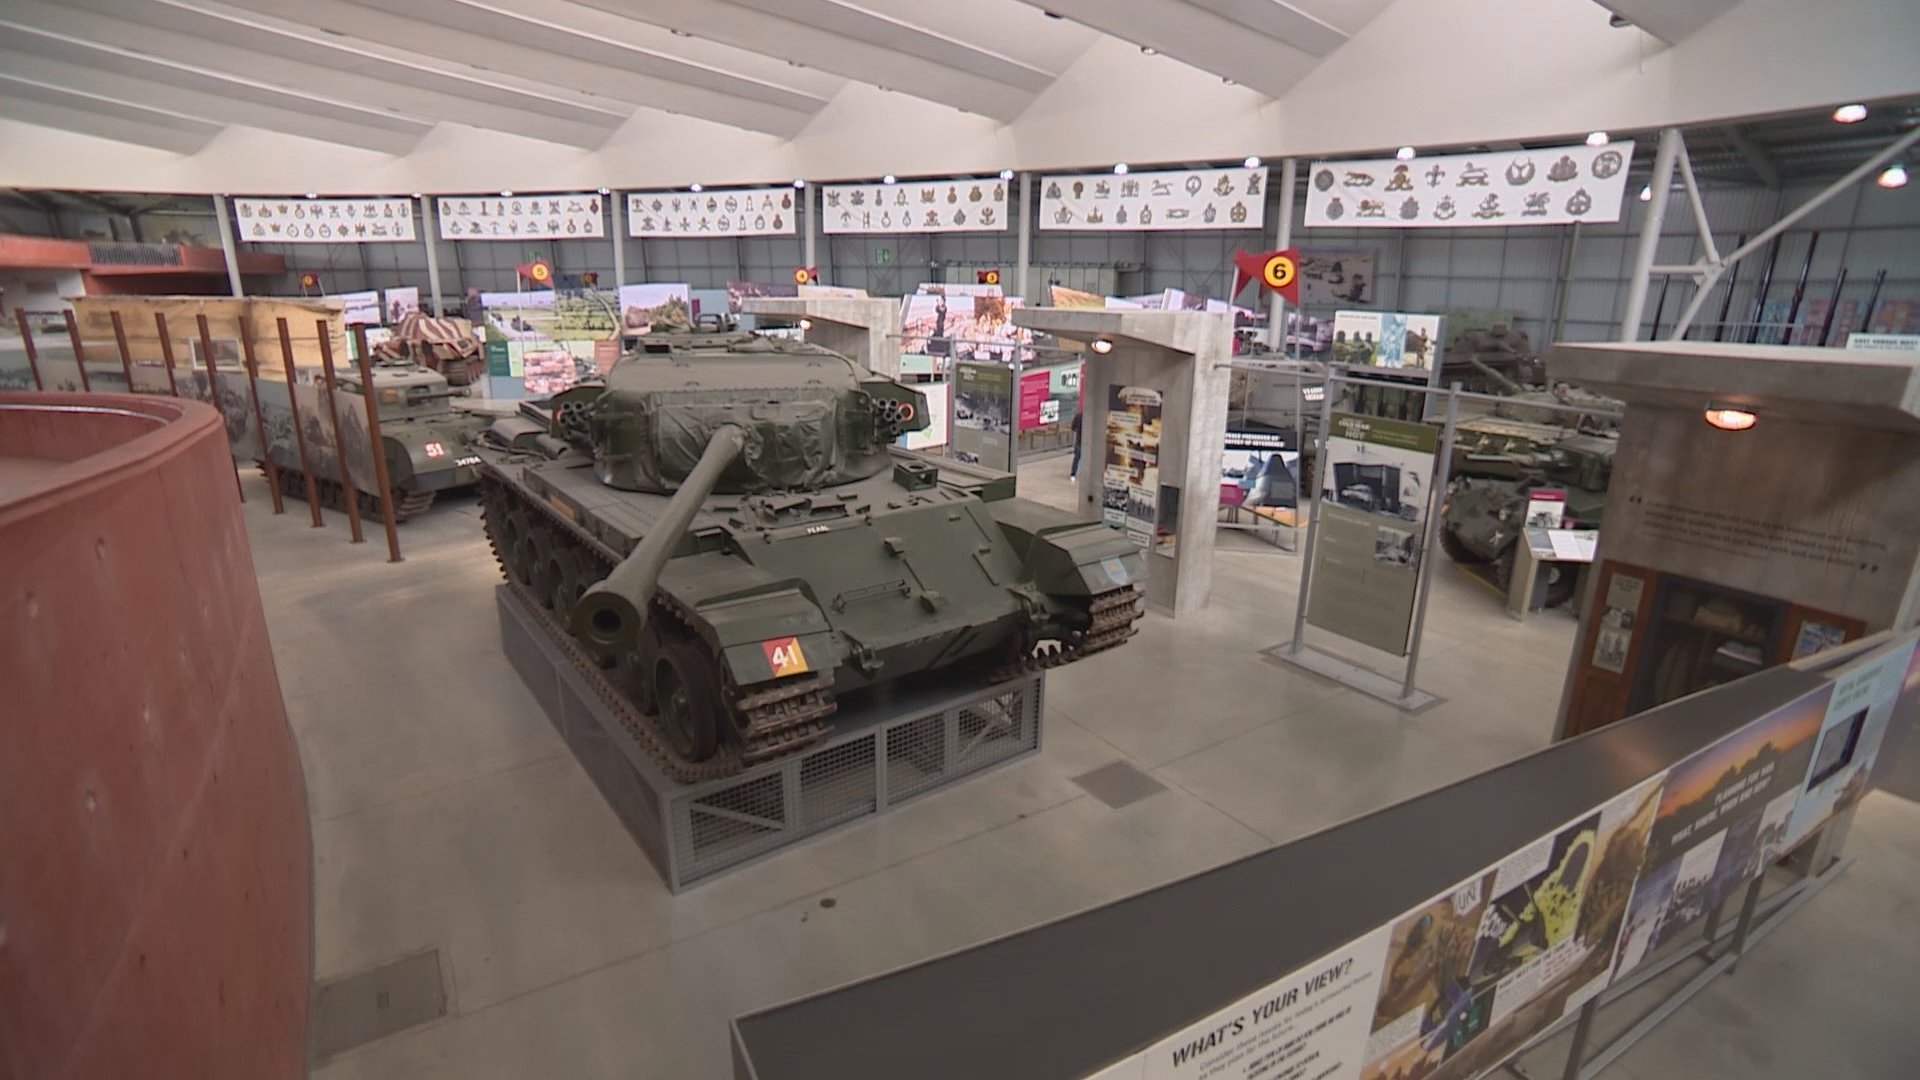 The Tank Museum Has 300 Armored Vehicles and Over 100 Million  Views  - The New York Times